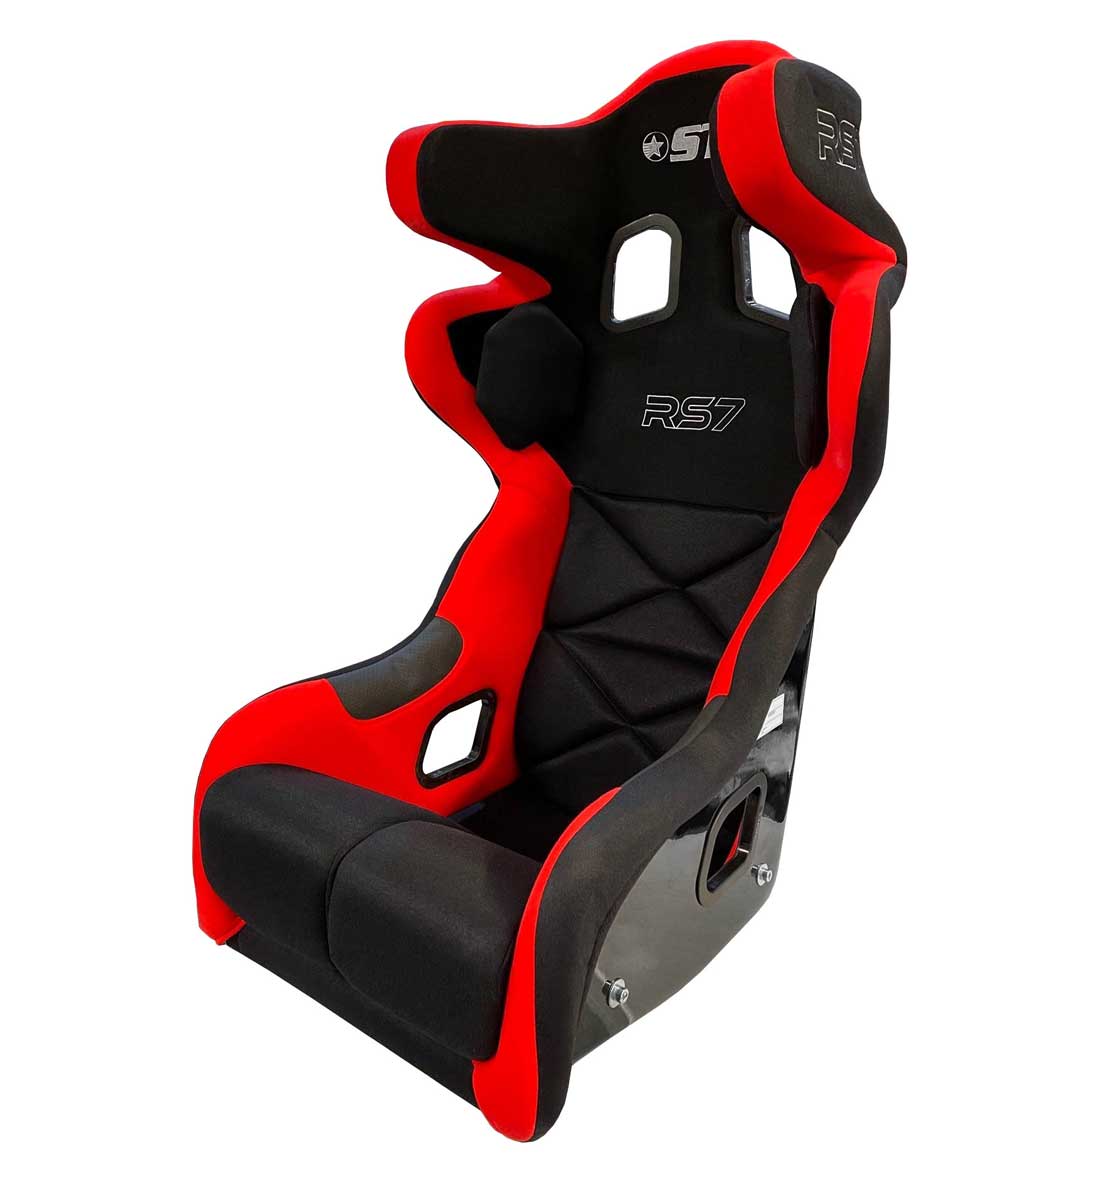 STR 'RS7' FIA Approved Race Seat - 2029 Red